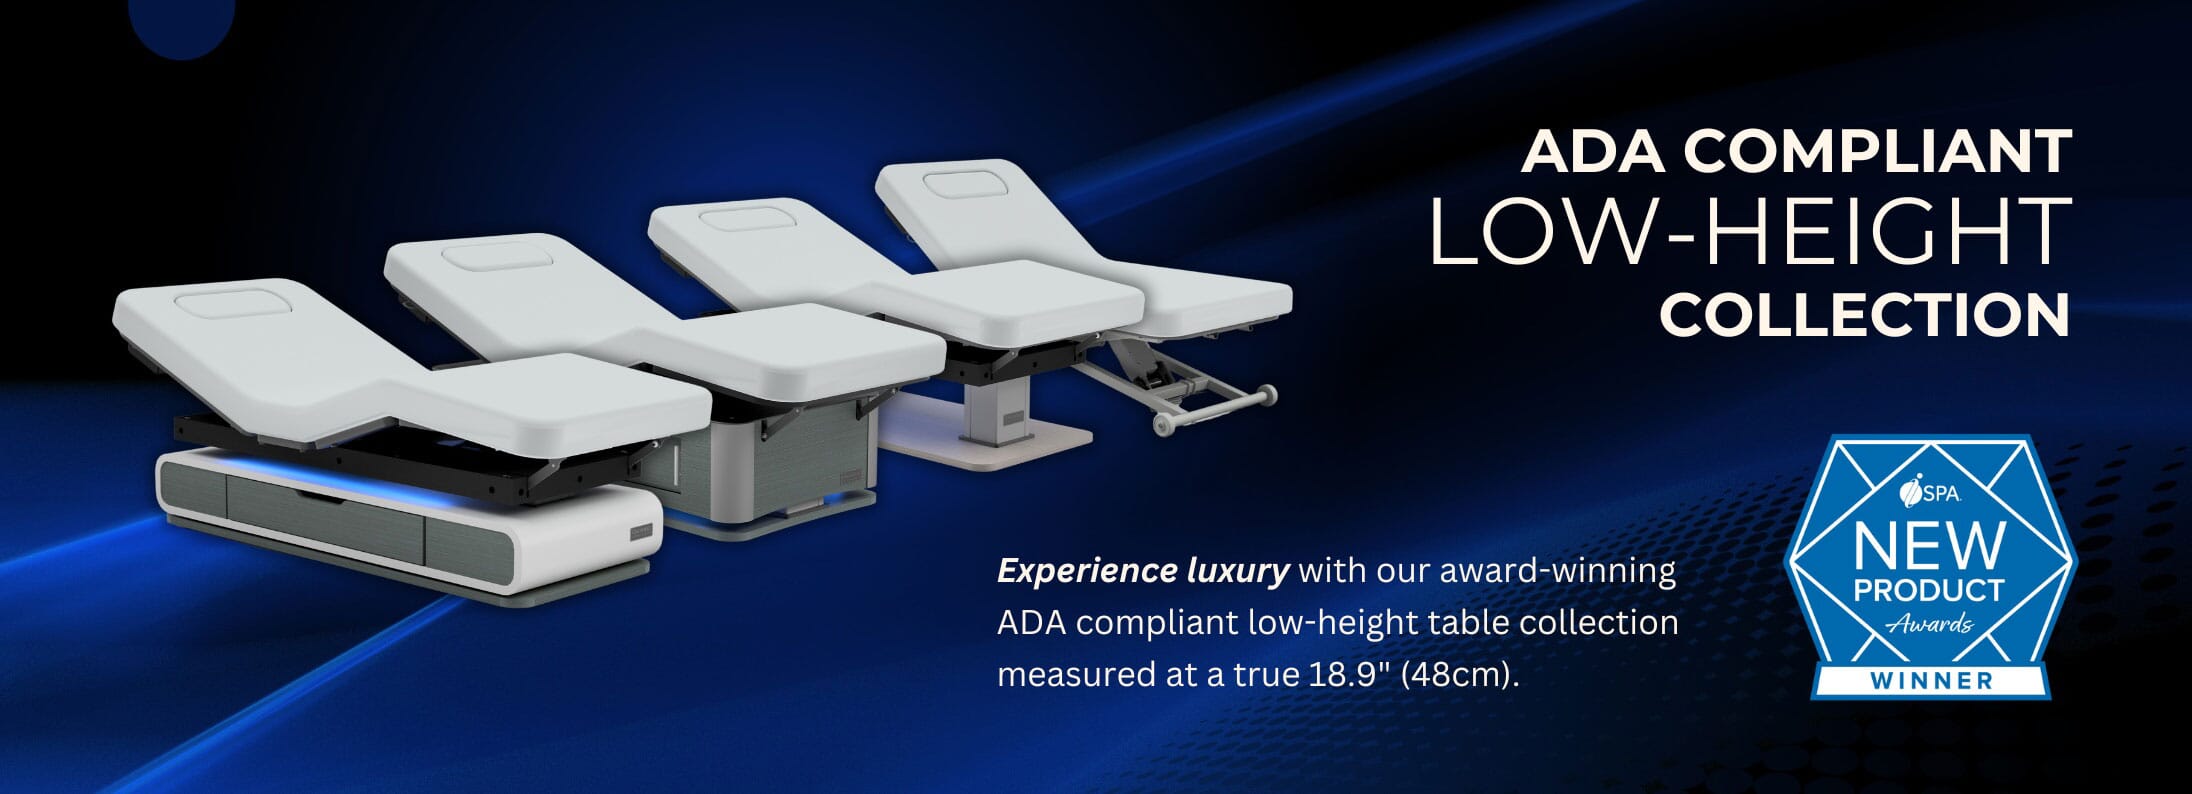 ADA Compliant Low-Height COllection